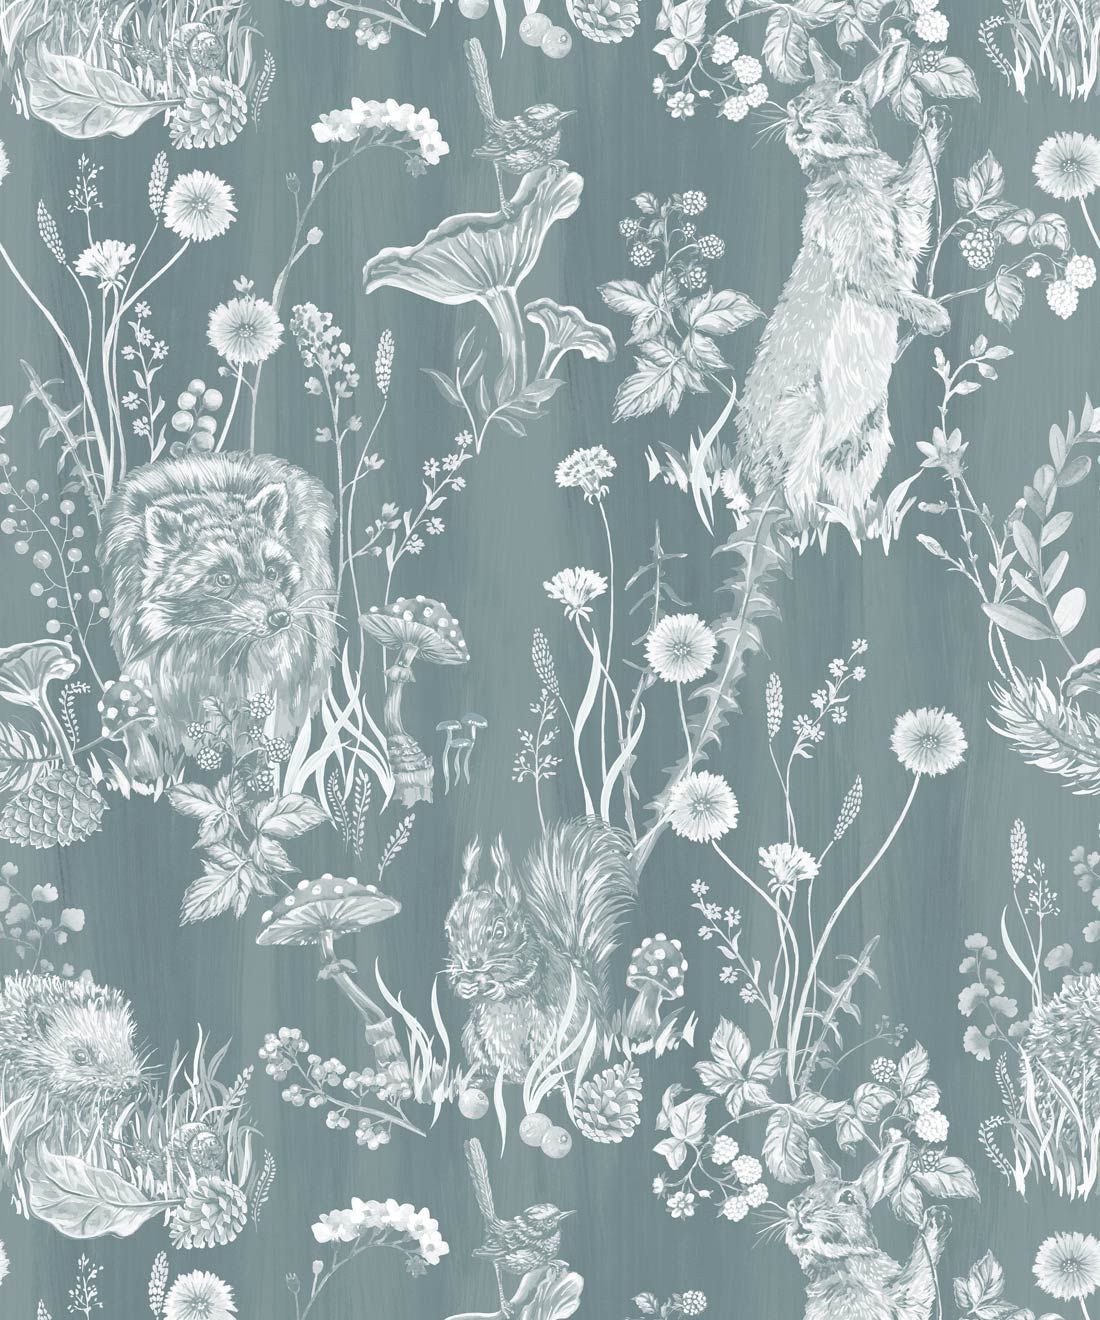 Woodland Friends Wallpaper • Forest Wallpaper with rabbits, hares, raccoons • Iryna Ruggeri • Duck Egg • Swatch